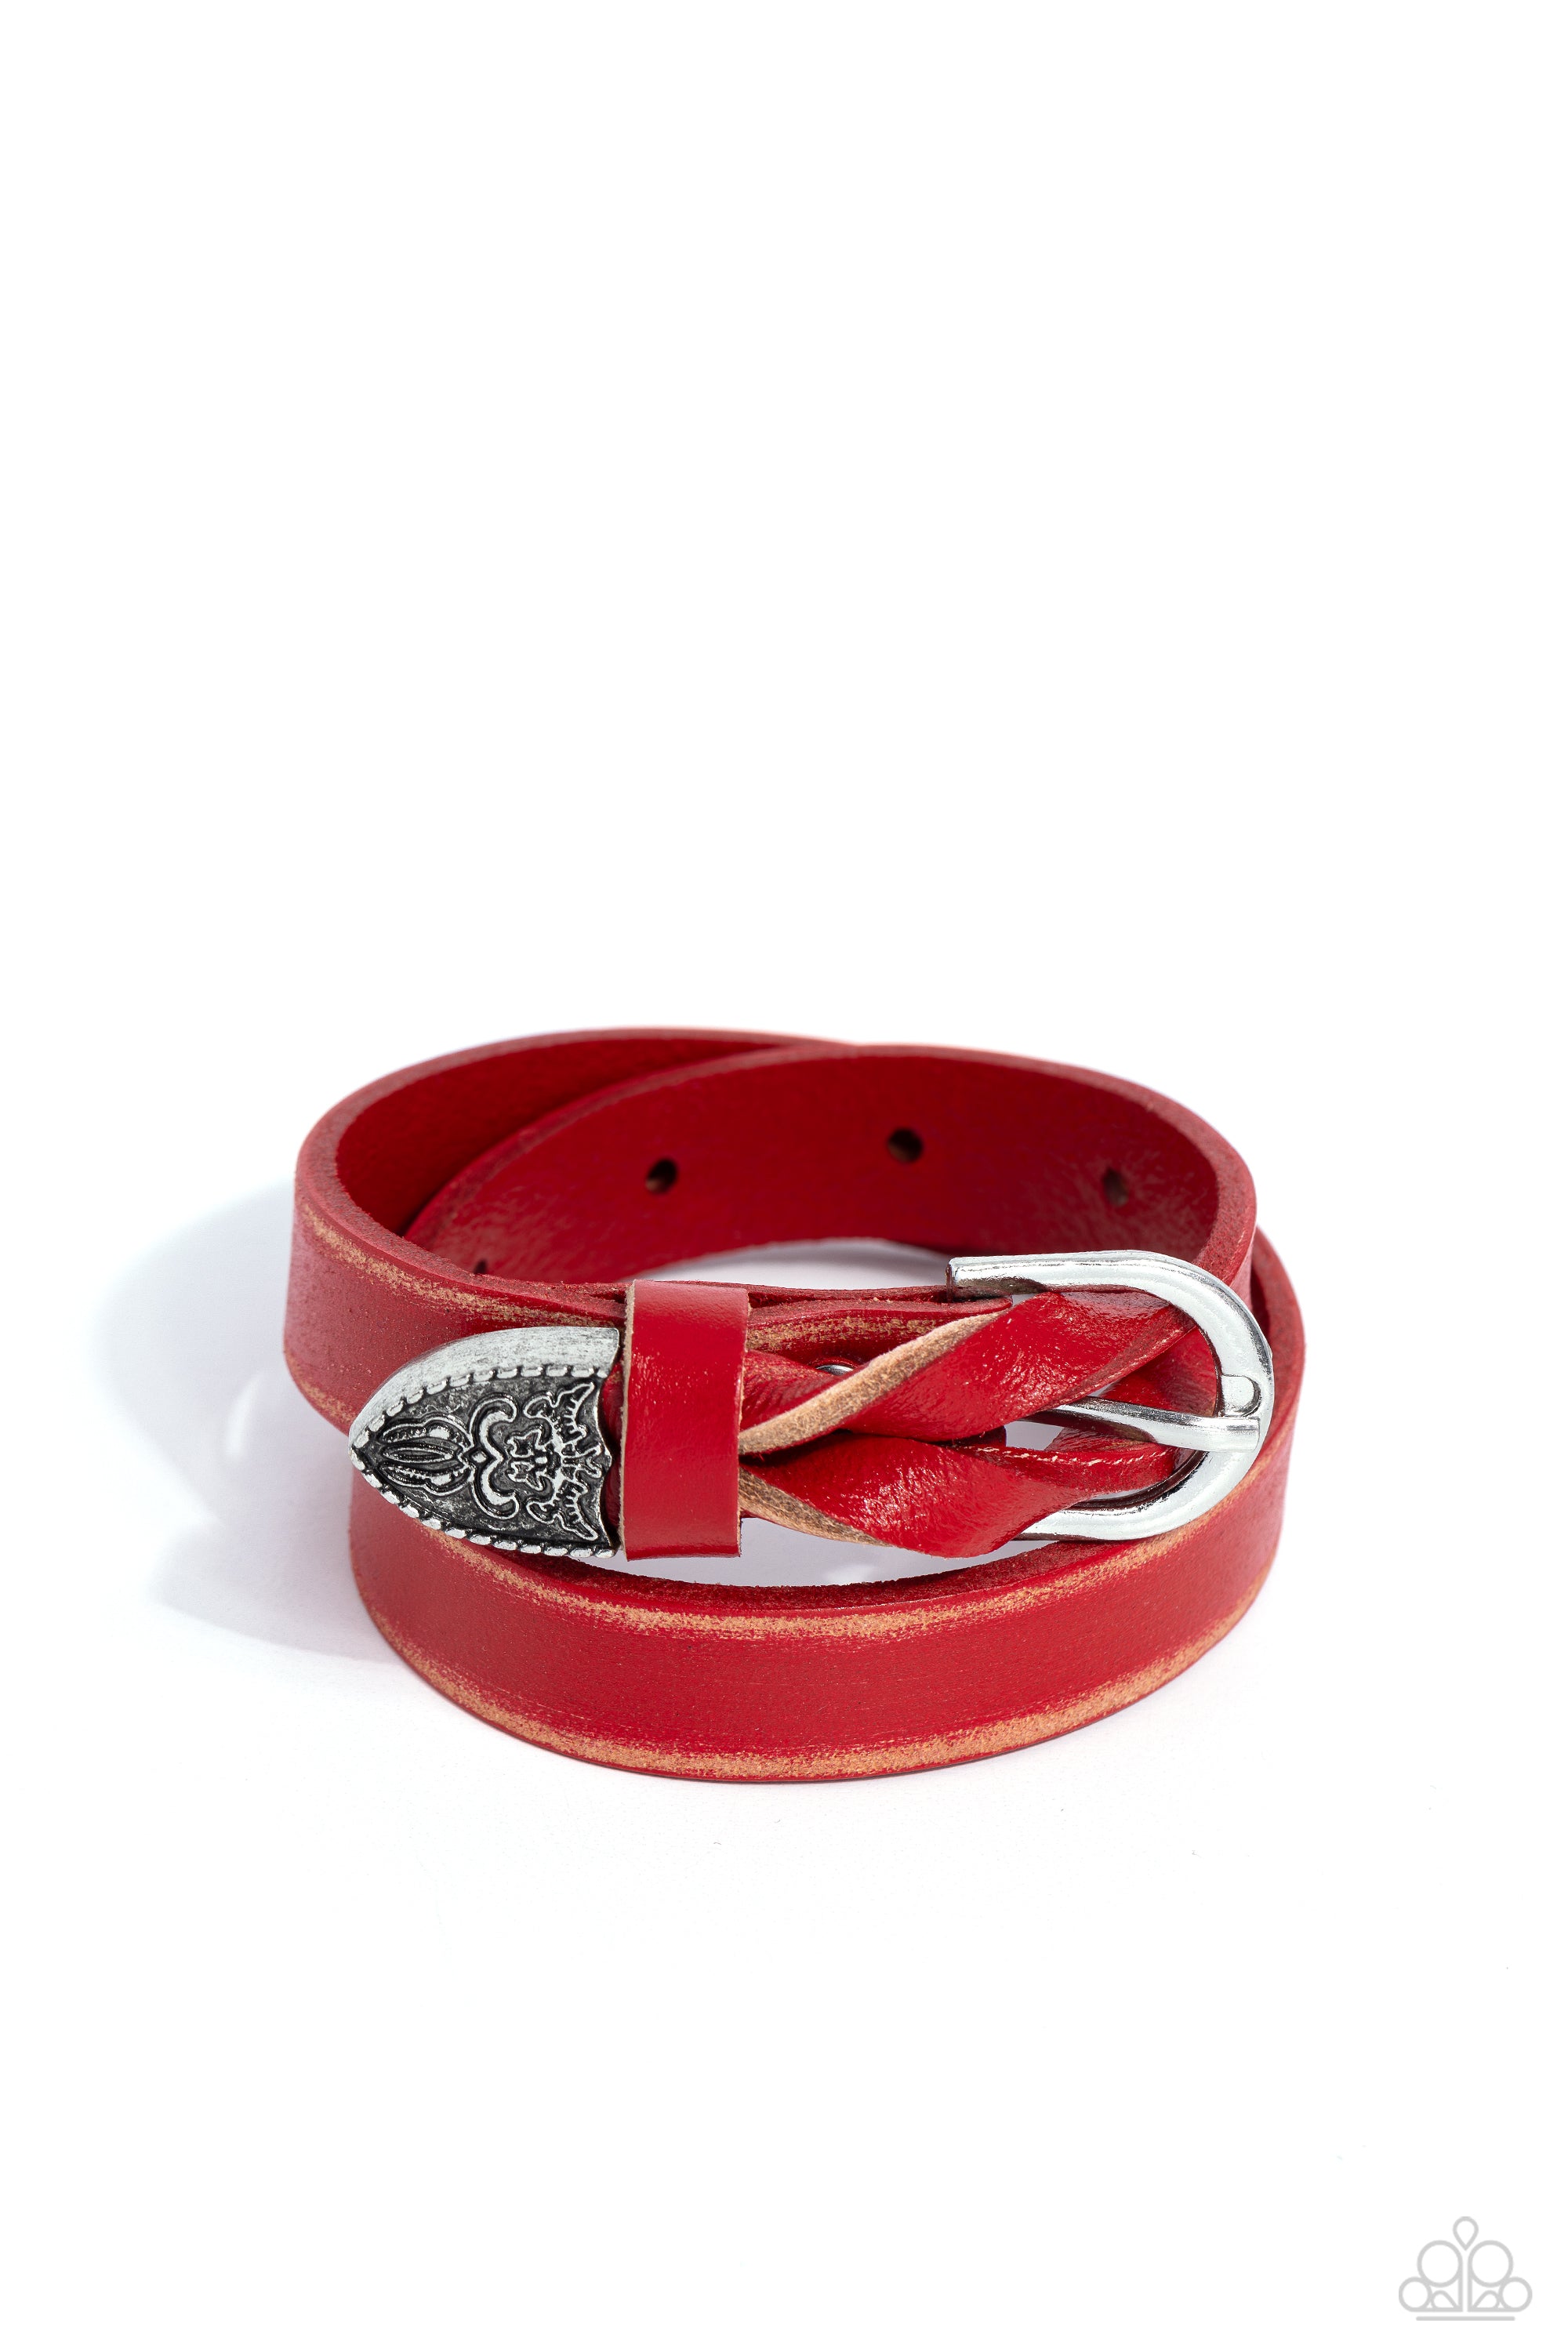 COAT OF ARMS COUTURE RED-BRACELET